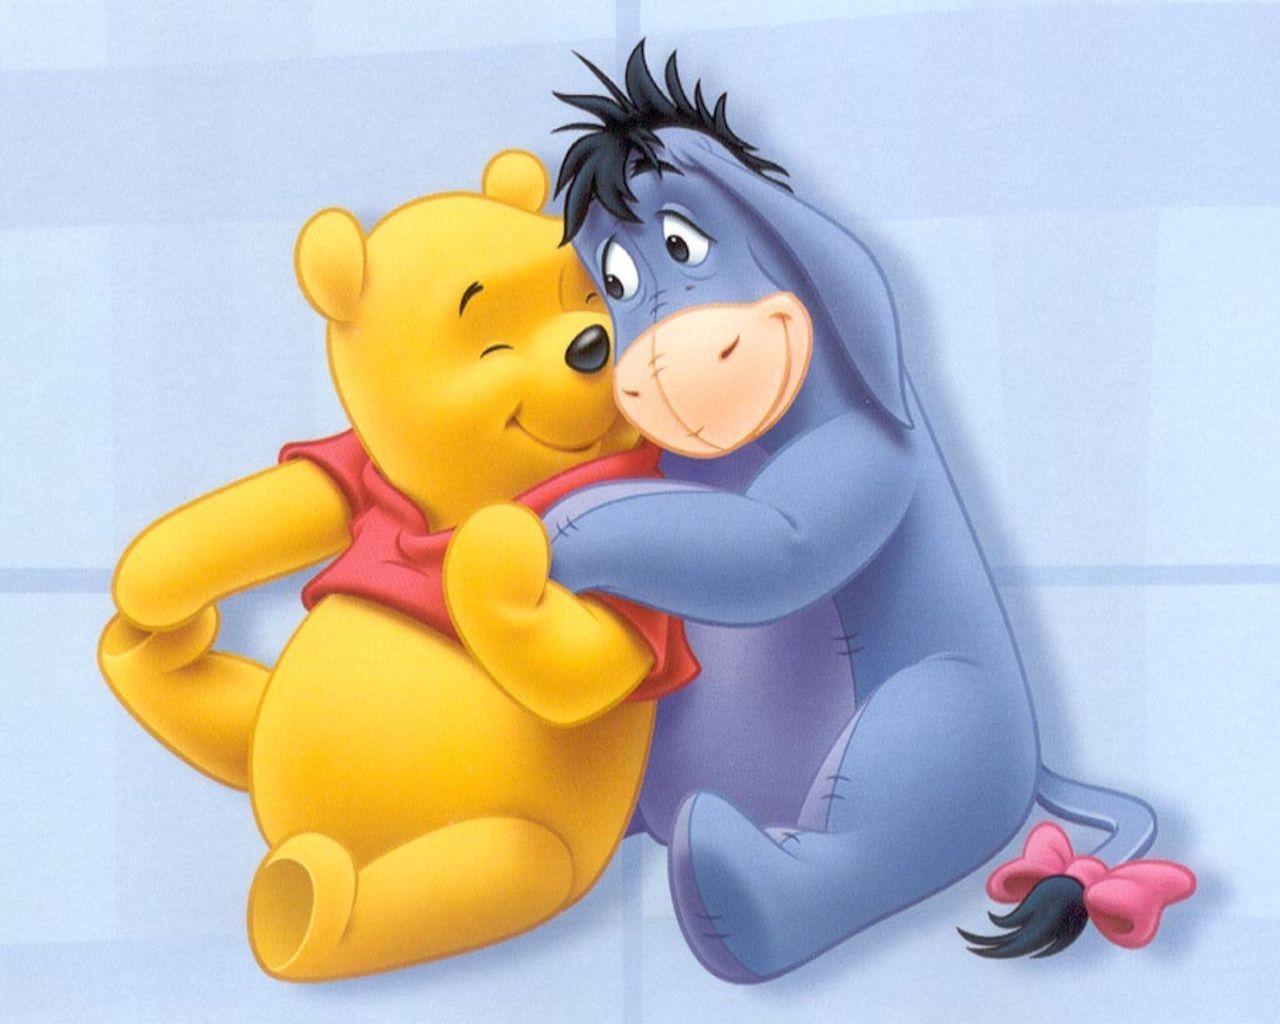 Winnie The Pooh Wallpaper For iPhone Wallpaper. Cariwall